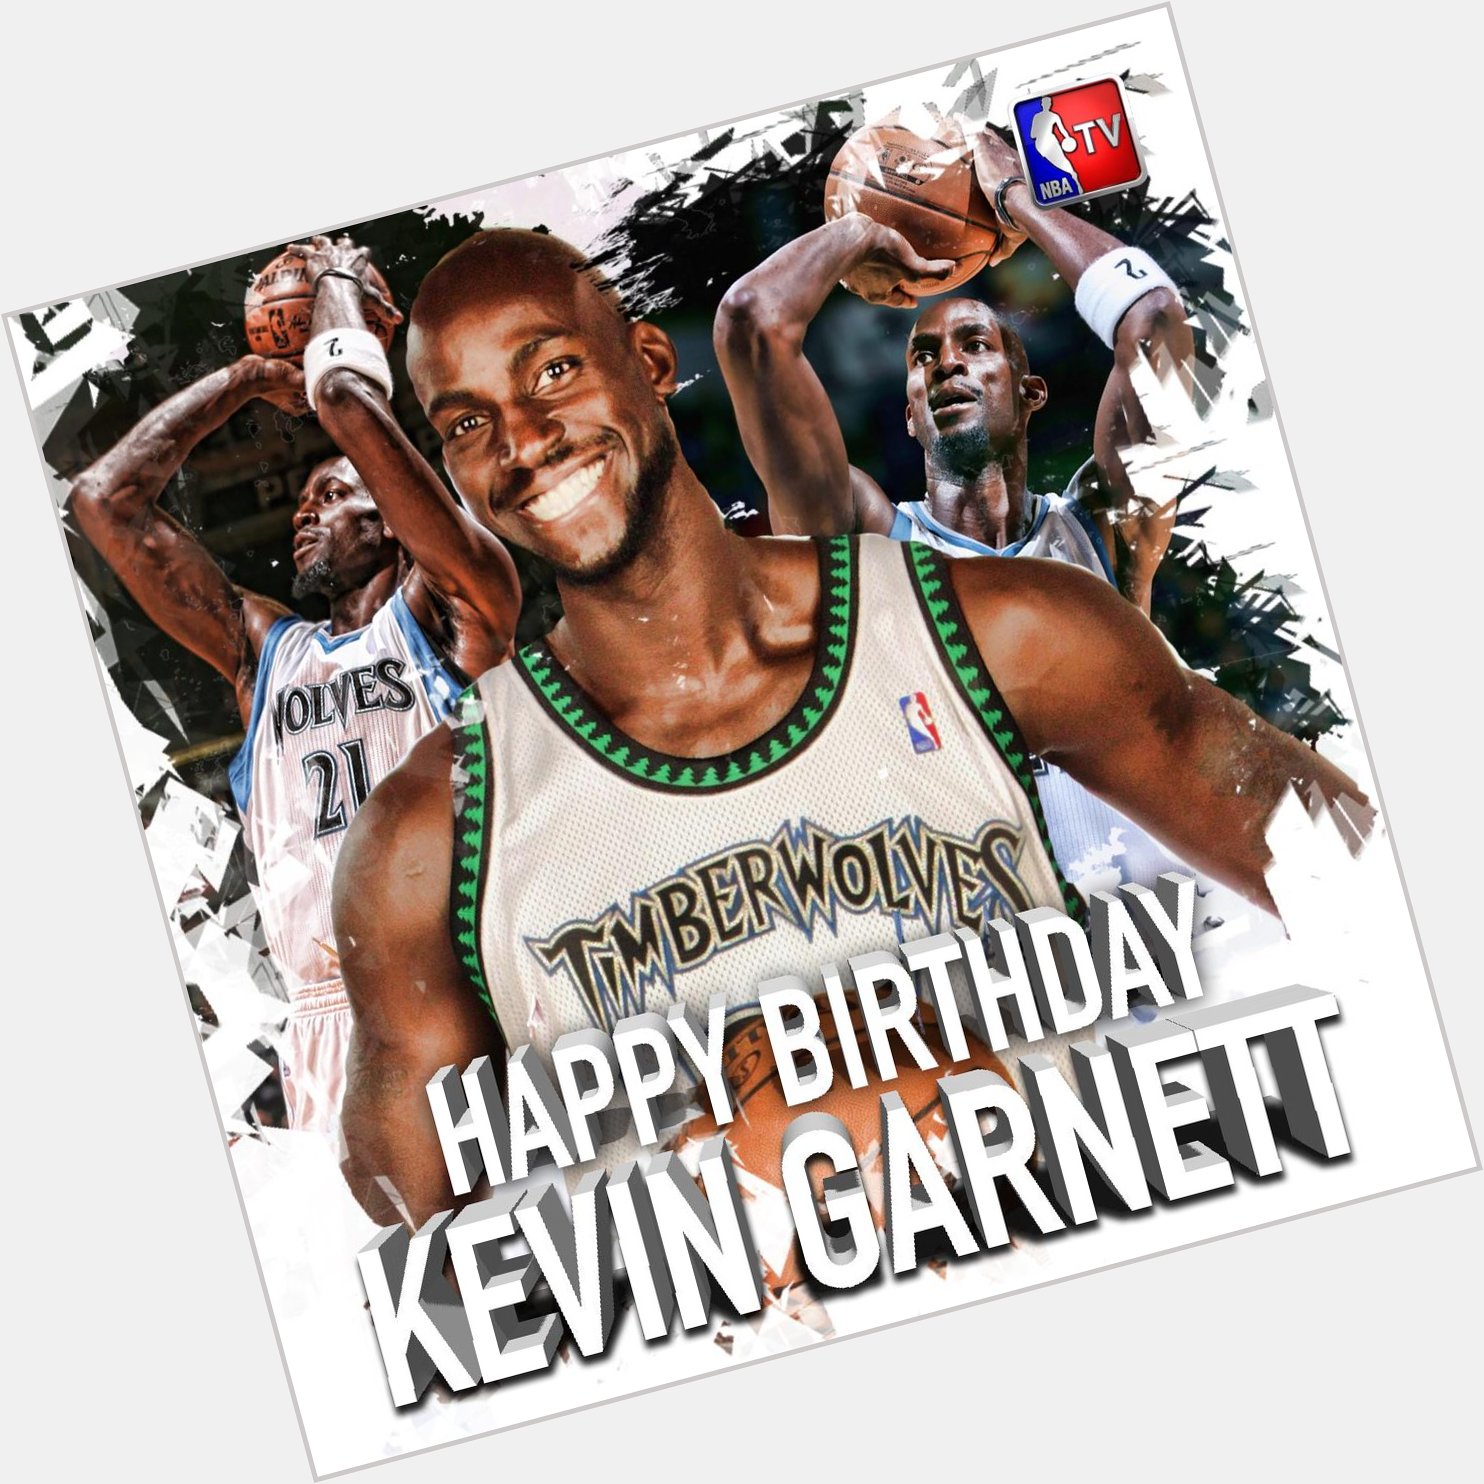 Join us in wishing 15-time All-Star and 2008 champion Kevin Garnett a Happy Birthday! 